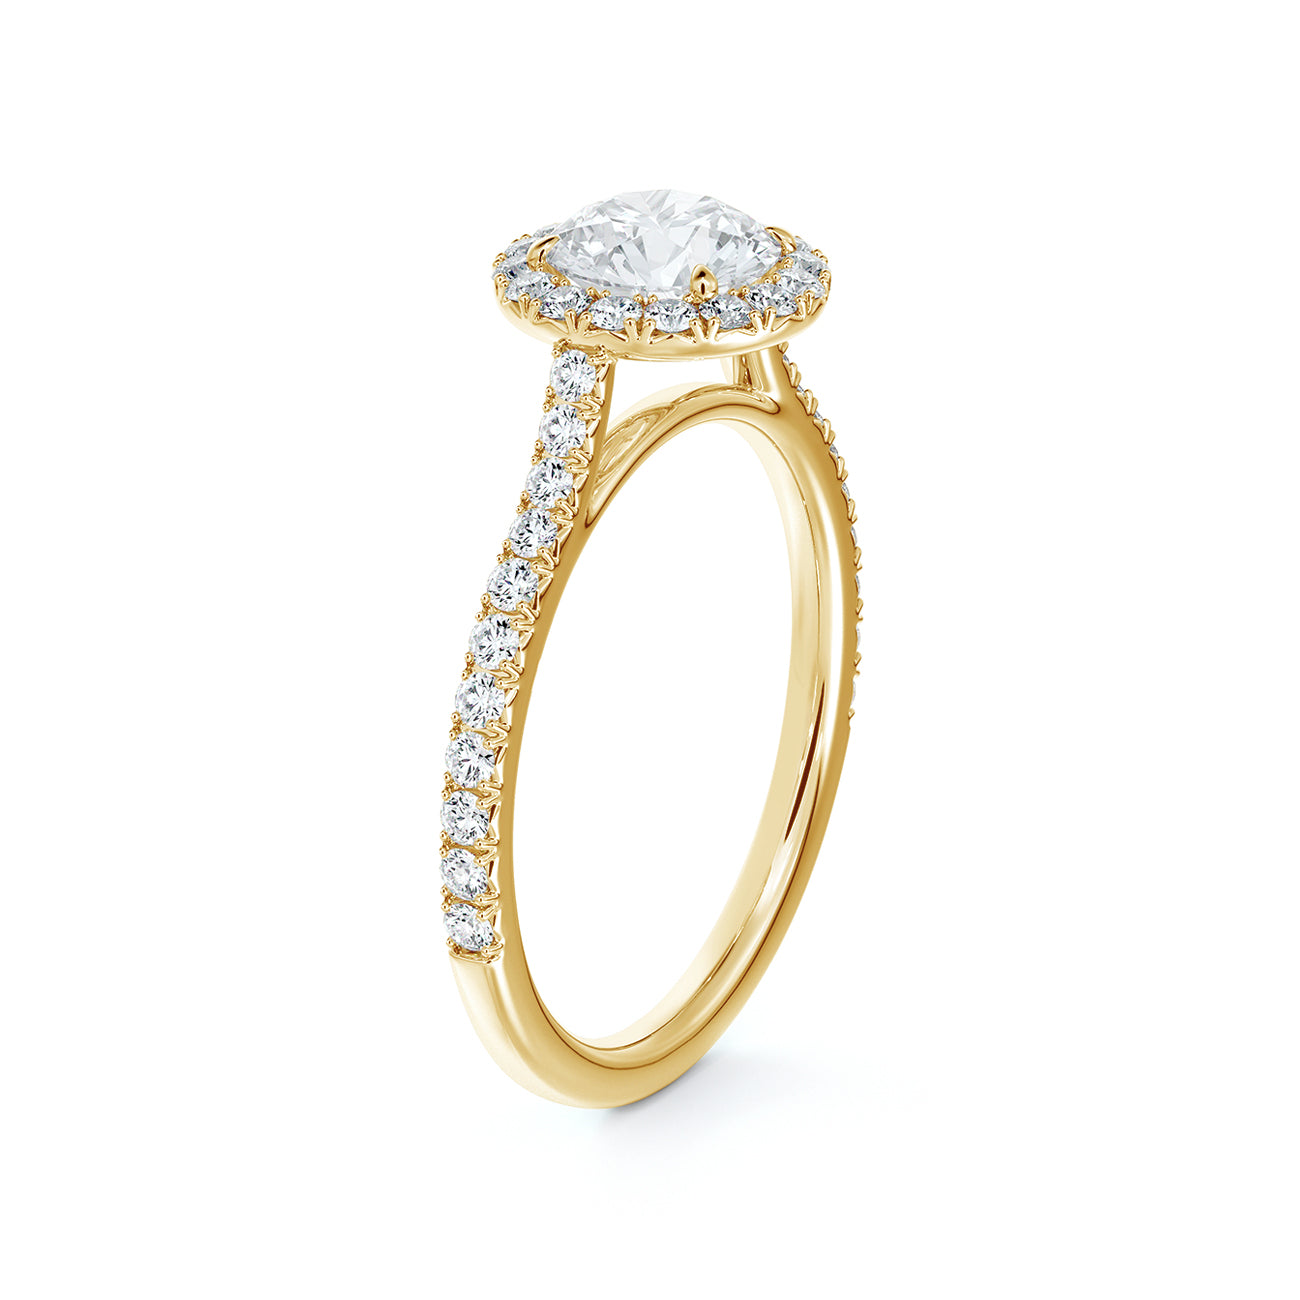 De Beers Forevermark Centre Of My Universe™ Round Brilliant Halo Engagement Ring